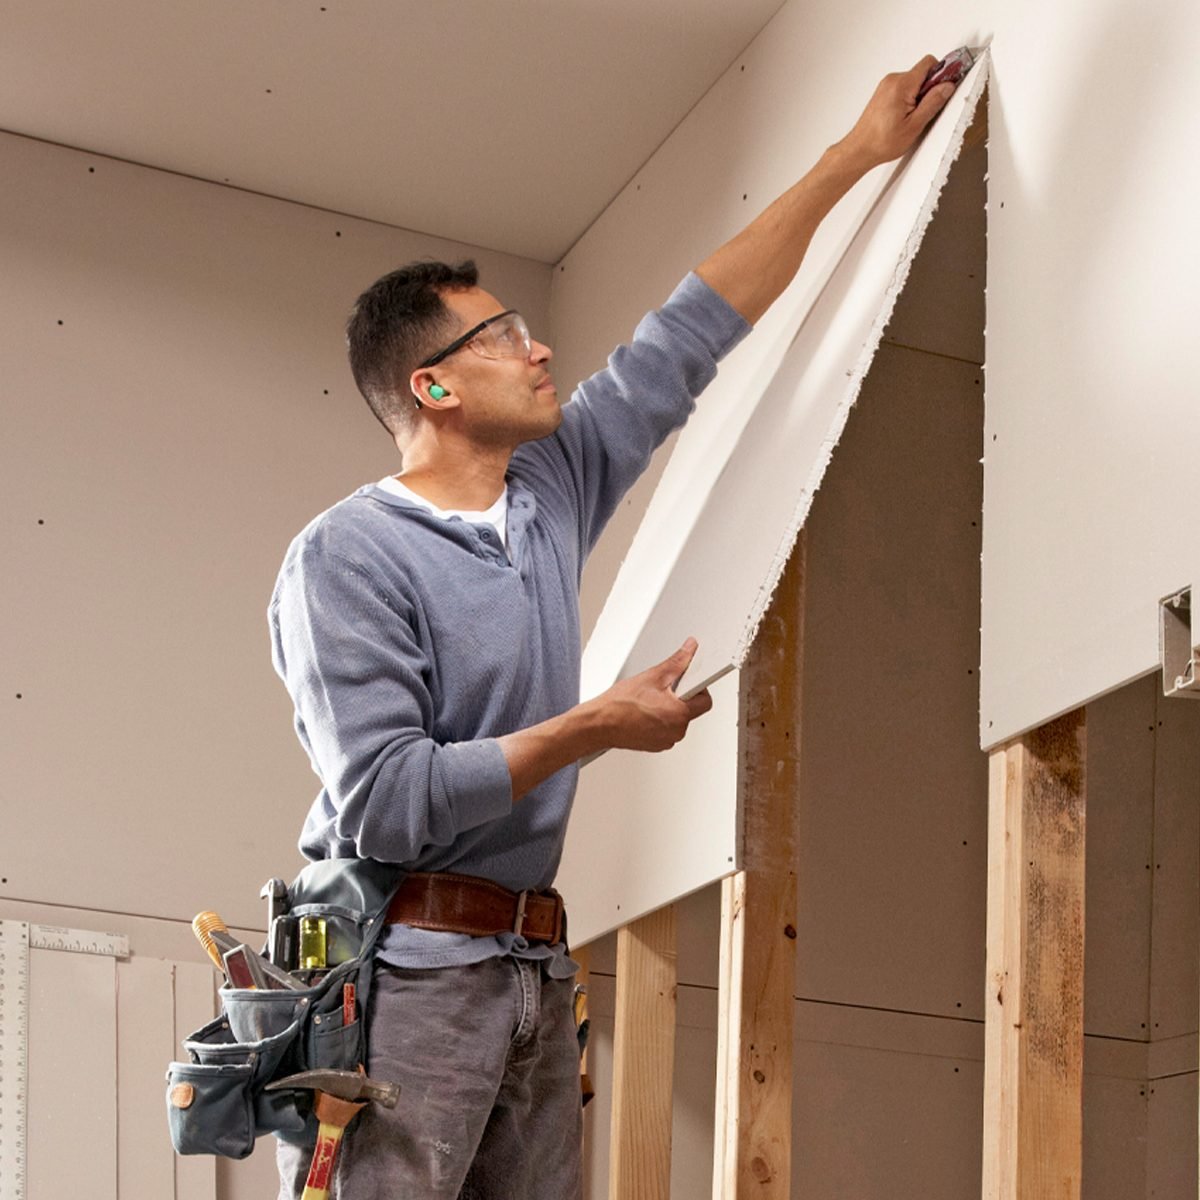 Homeowner's Guide to Drywall